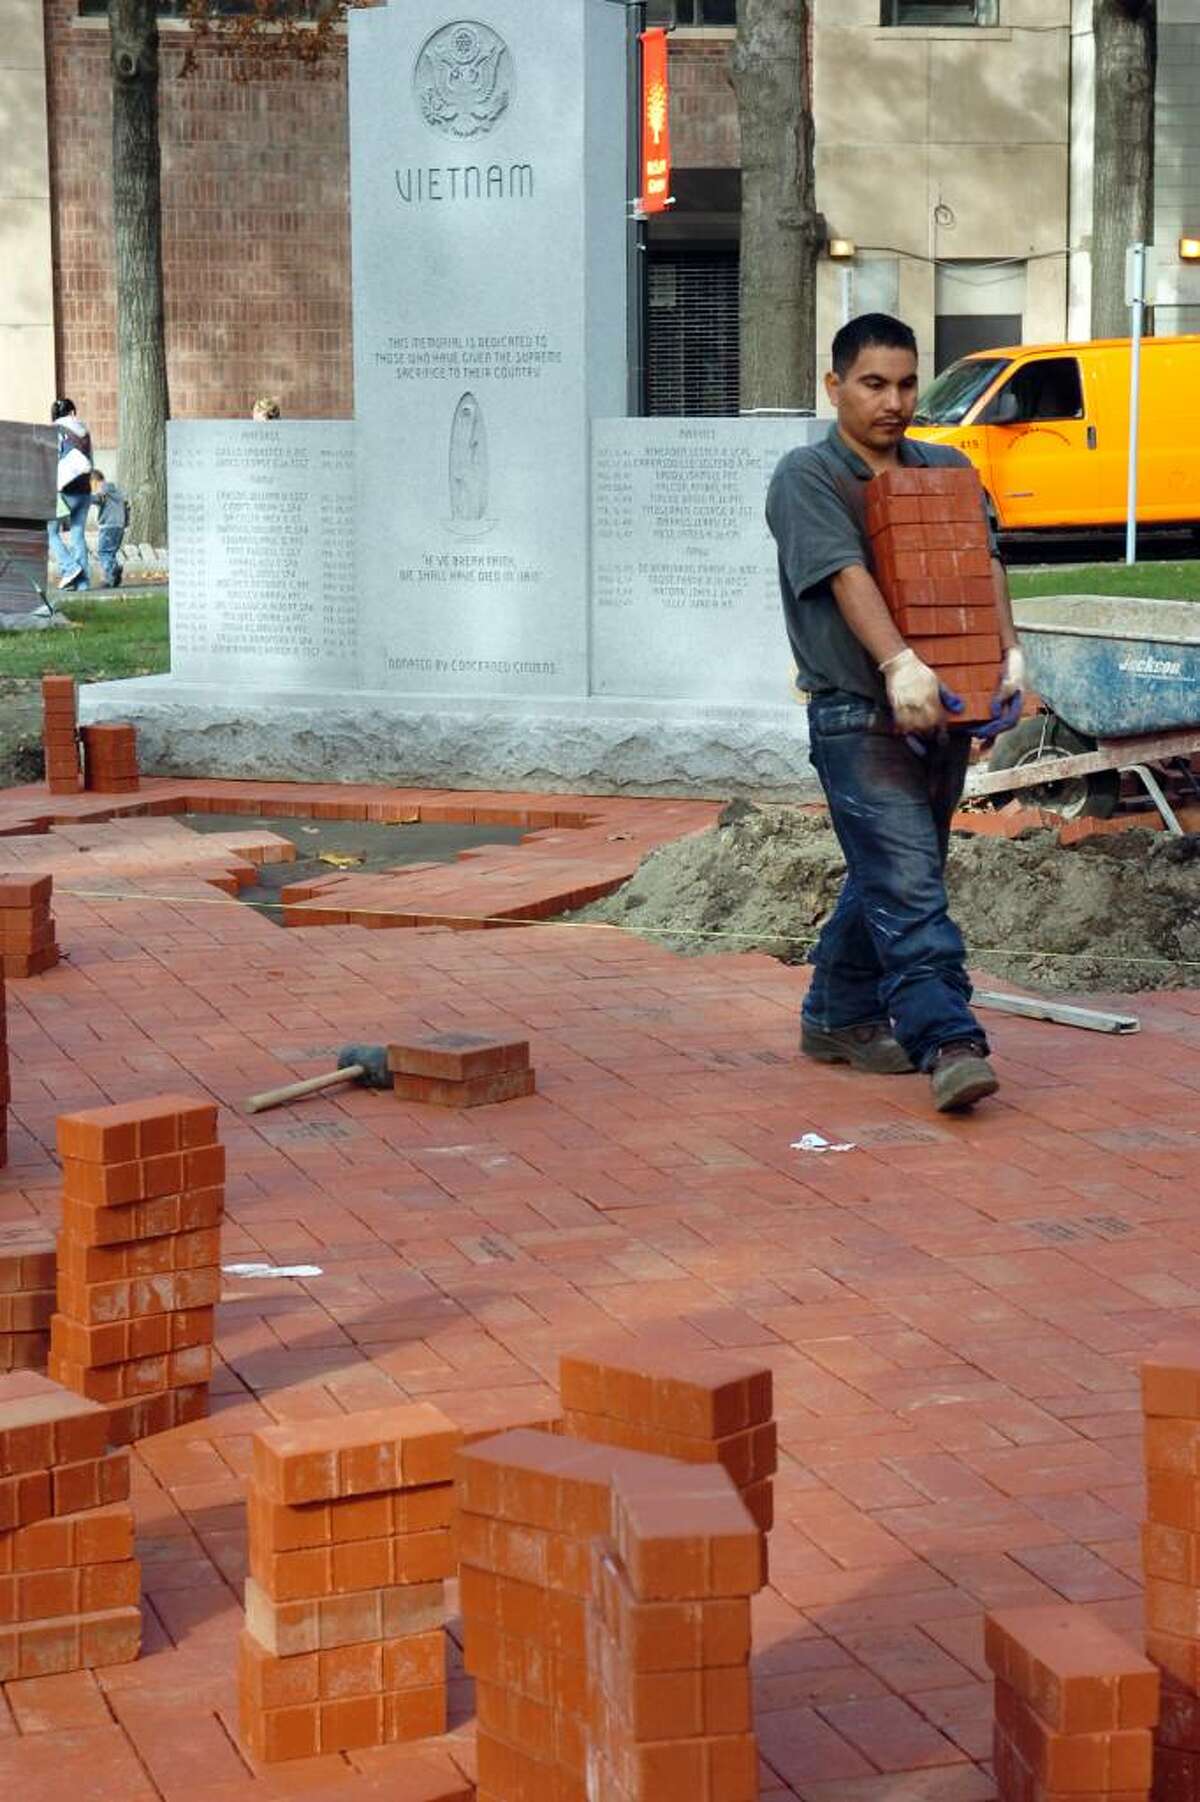 Drian (cq) Cjona carries a pile of bricks near the Vietnam Memorial, next to McLevy Hall, in downtown Bridgeport on Nov. 2nd, 2009. The Vietnam Memorial, which has stood for years, has been moved to a new location next to the recently dedicated World War II memorial.